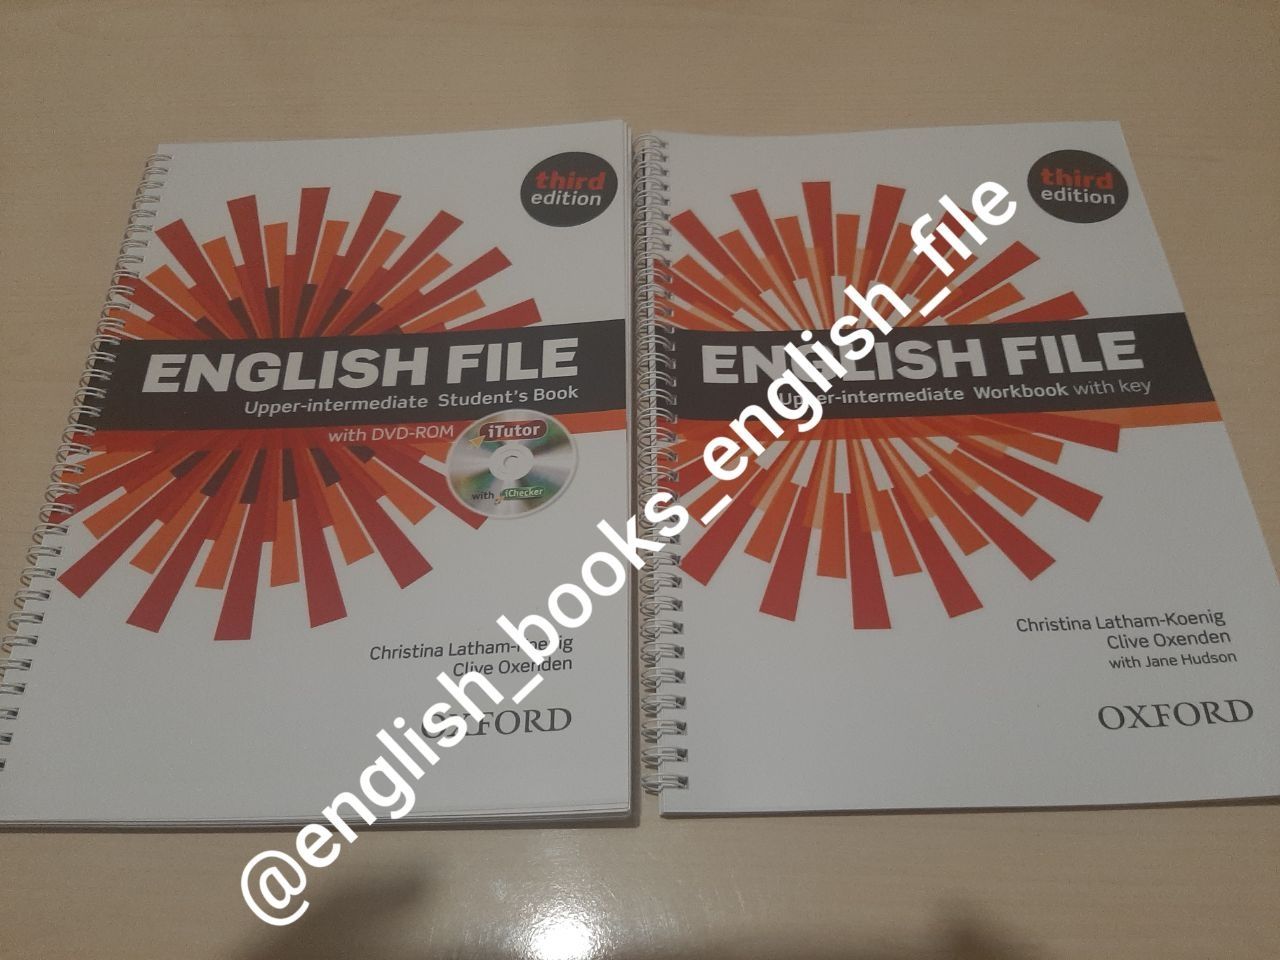 English file, solutions, family and friends, headway, английский книги